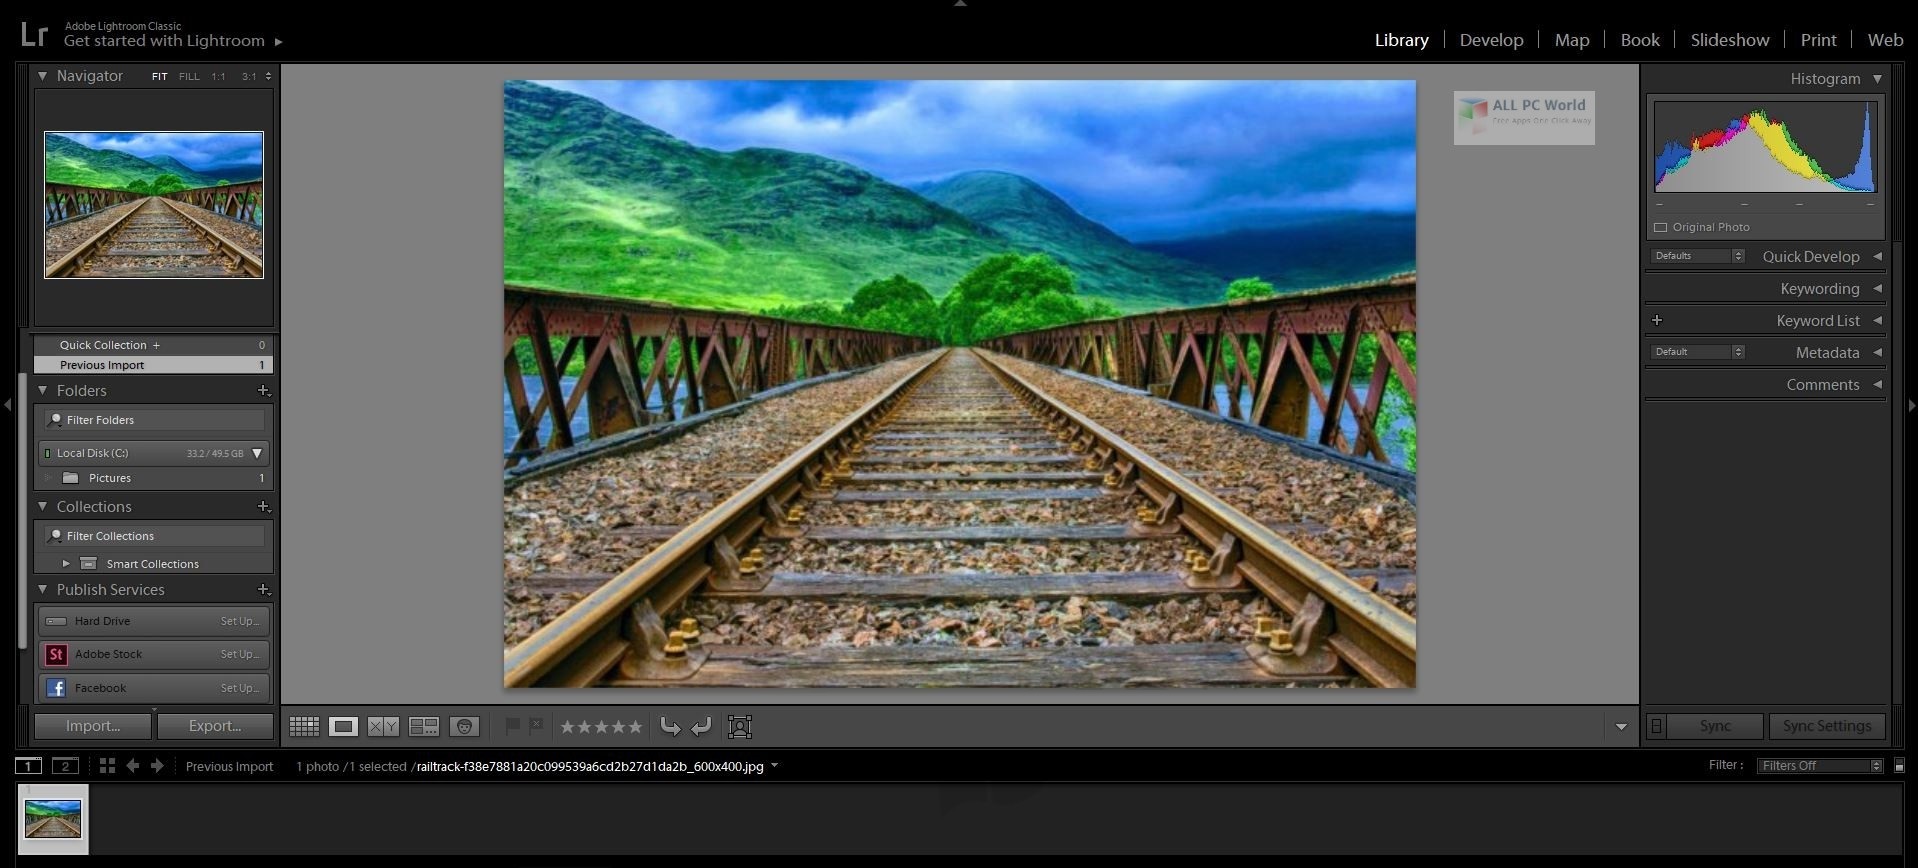 download The Adobe Photoshop Lightroom Classic CC Book for Digital Photographers torrent